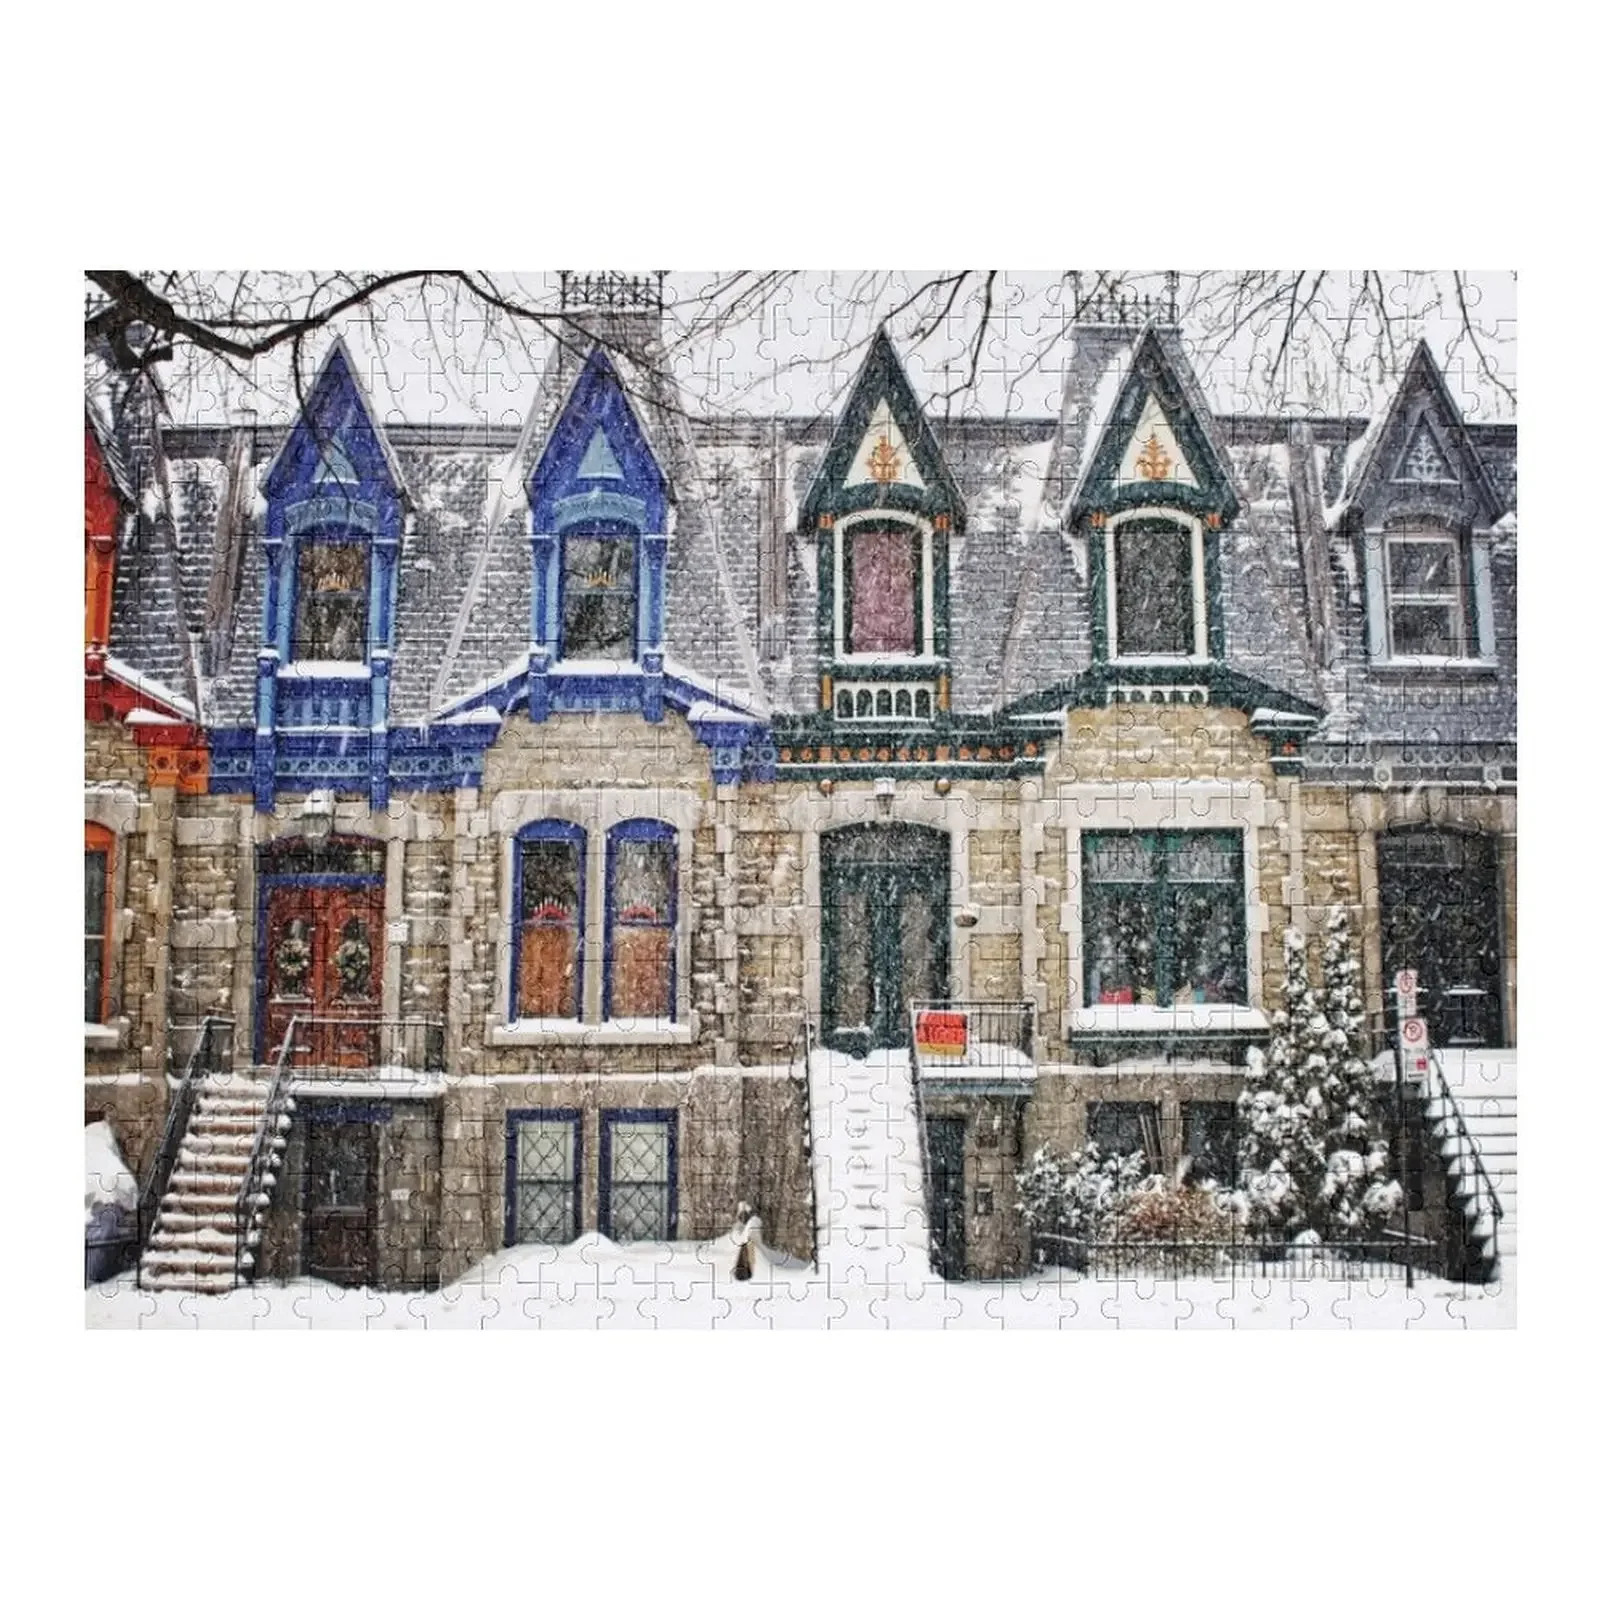 Montreal Victorian Architecture - The Enchanted Winter Jigsaw Puzzle Wooden Boxes Wooden Decor Paintings Puzzle